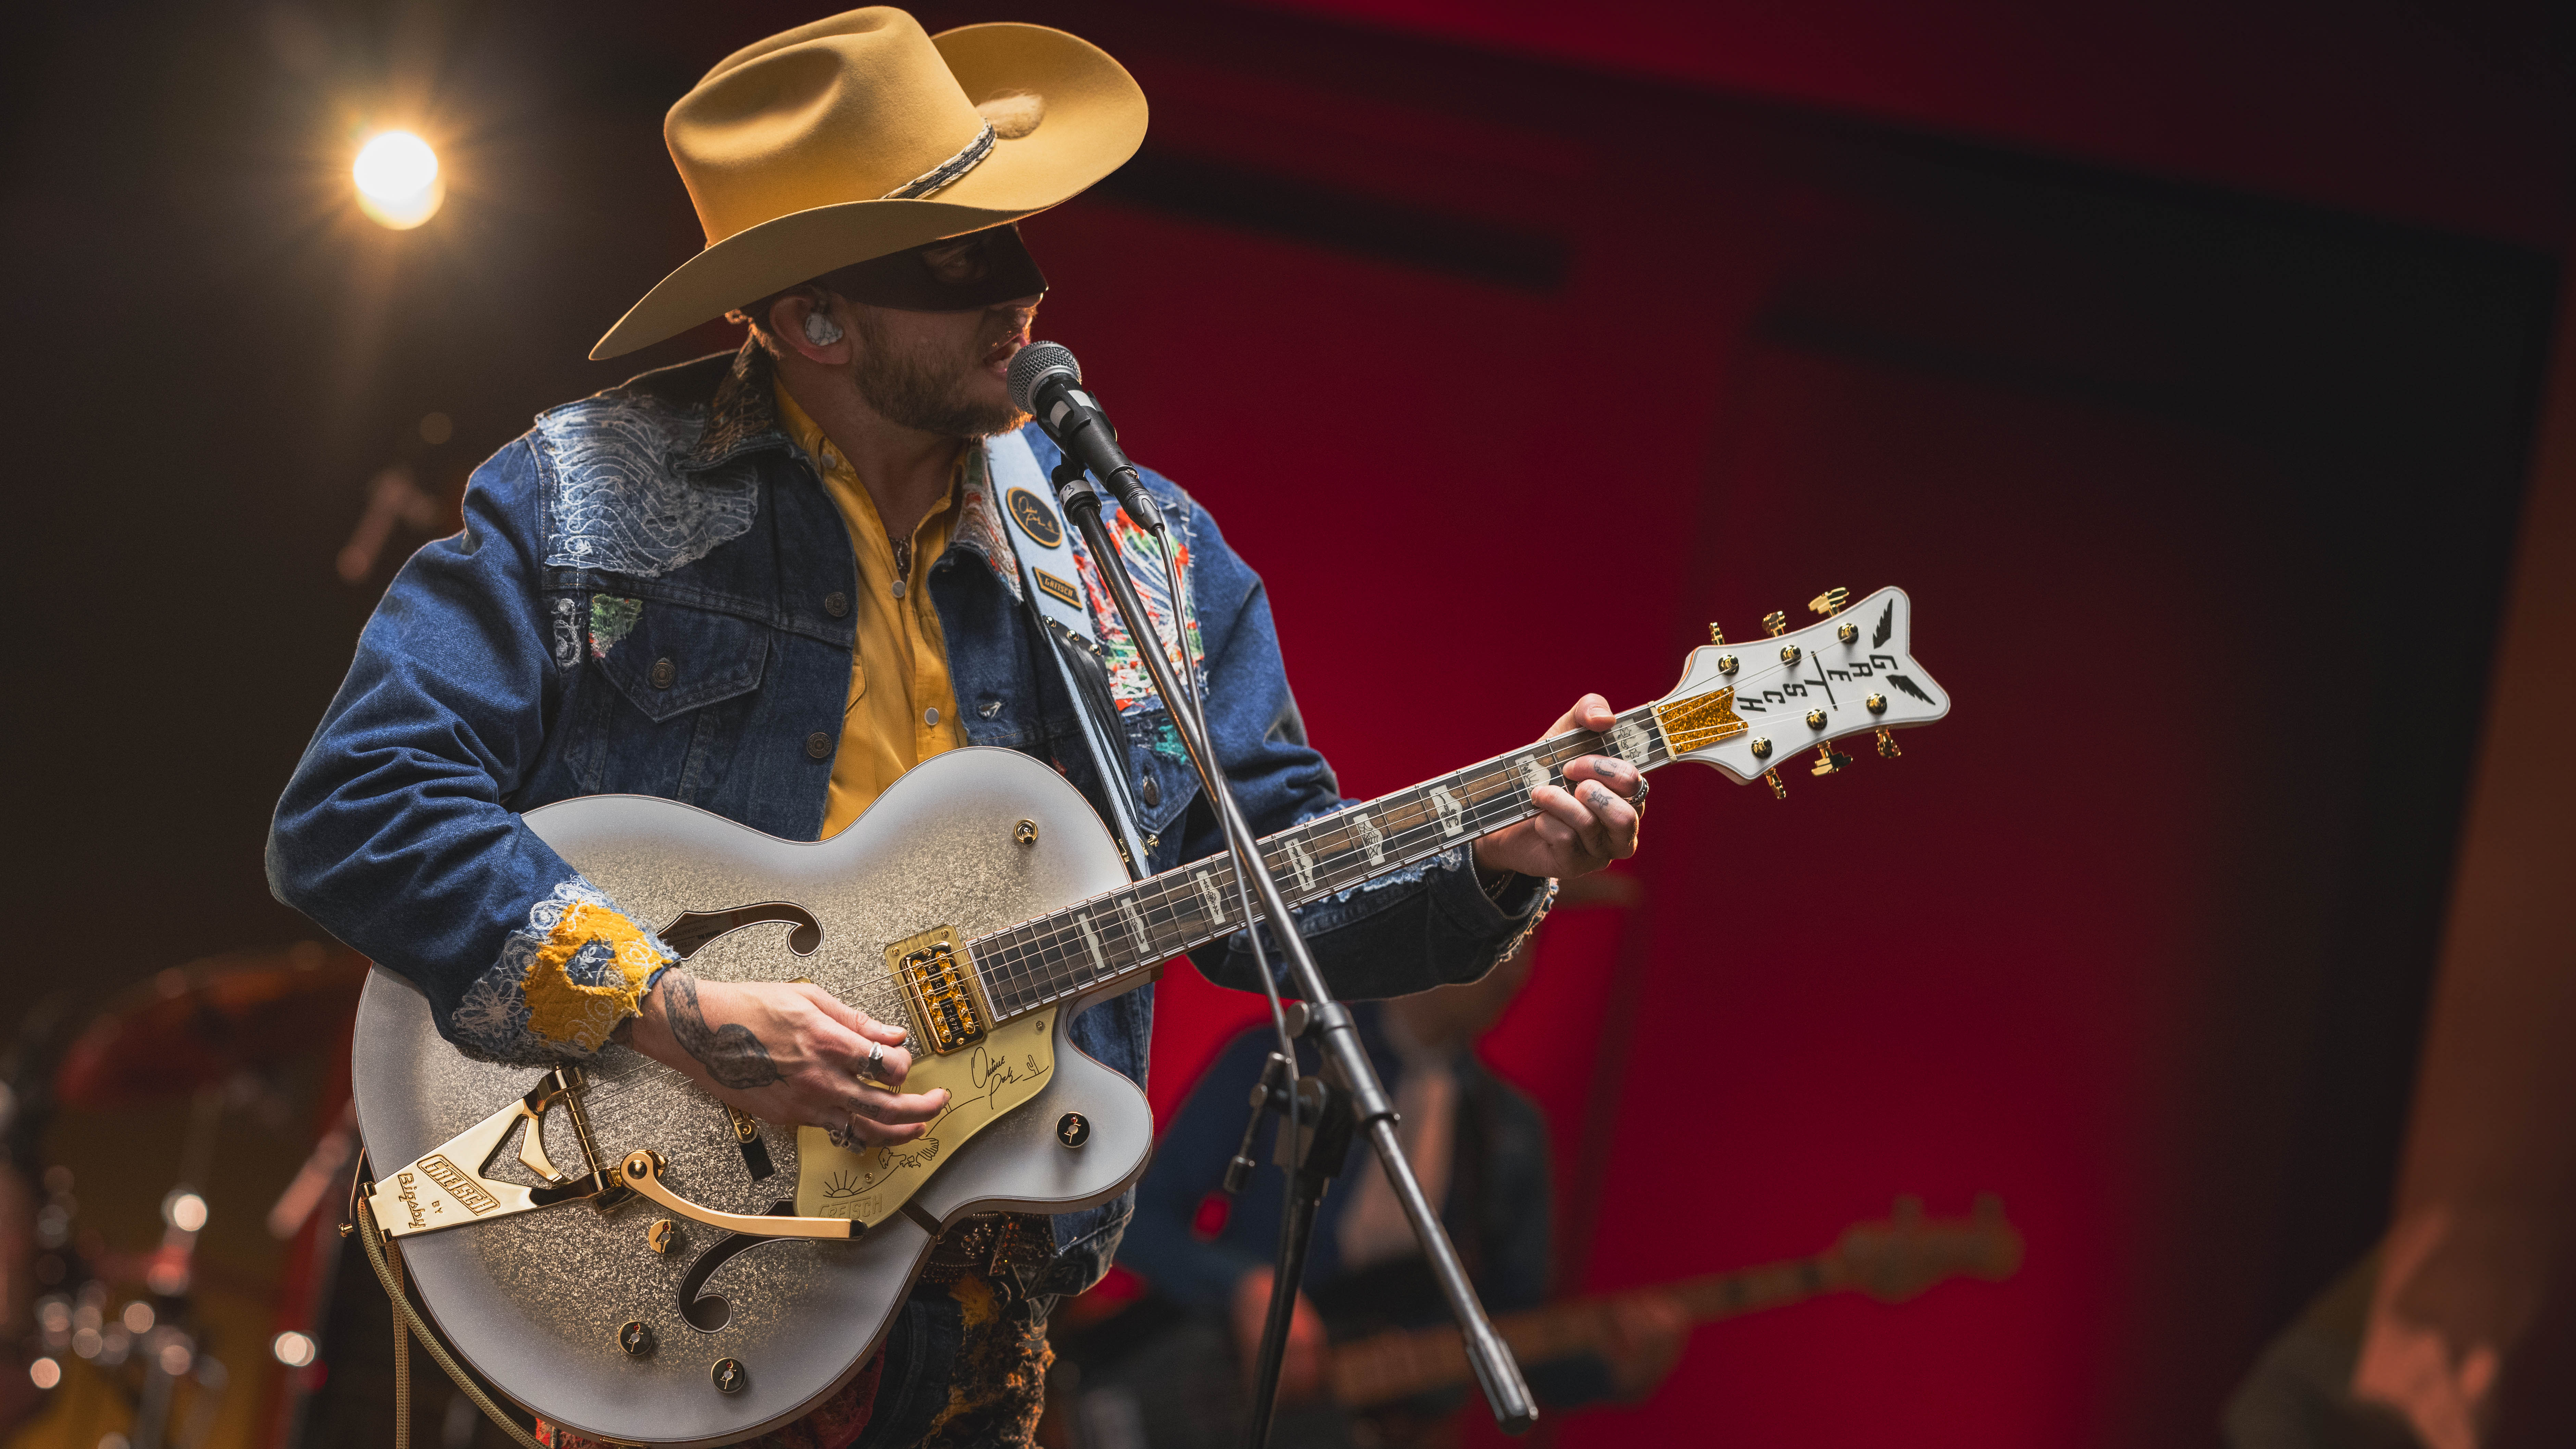 "We wanted to stay true to the original, whilst adding some pizzazz": Gretsch launch the Orville Peck Falcon